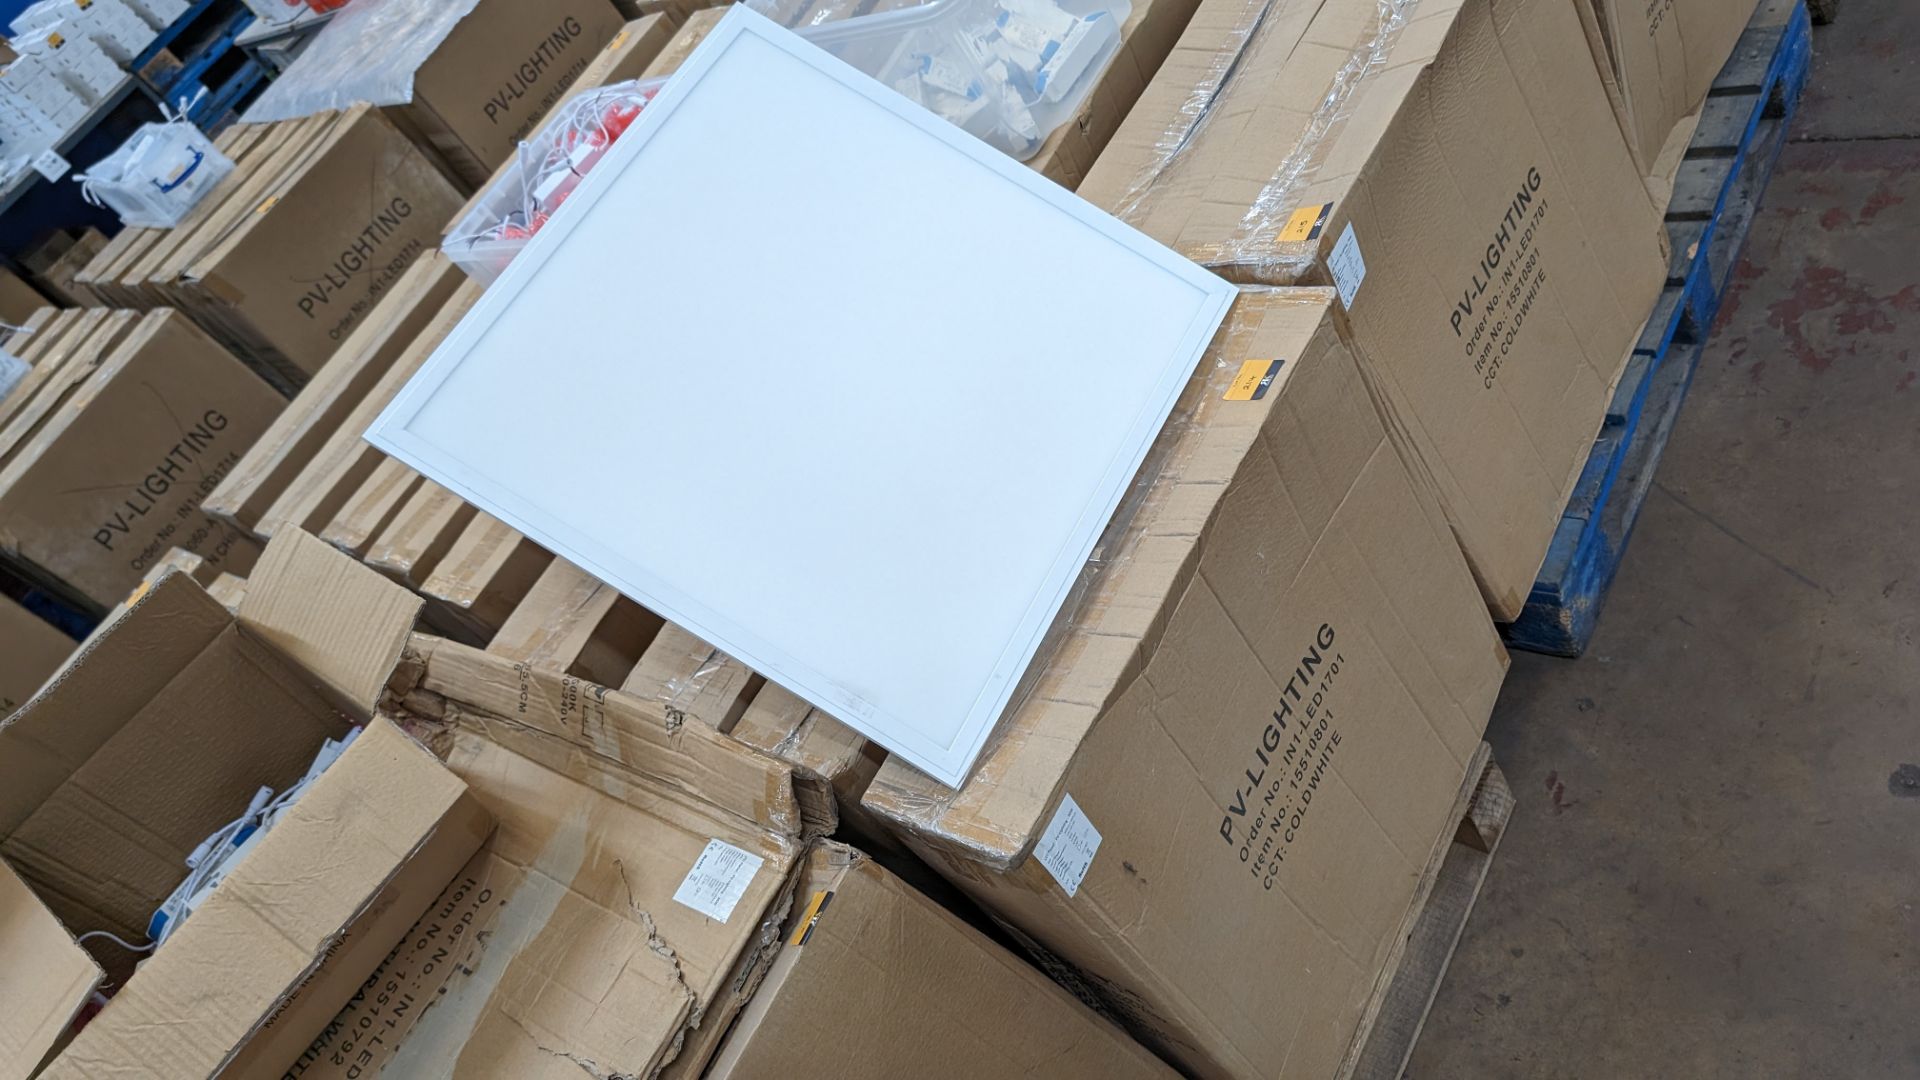 16 off 600mm x 600mm 36w 6000k 4320 lumens cold white LED lighting panels. 36w drivers. This lot c - Image 4 of 16